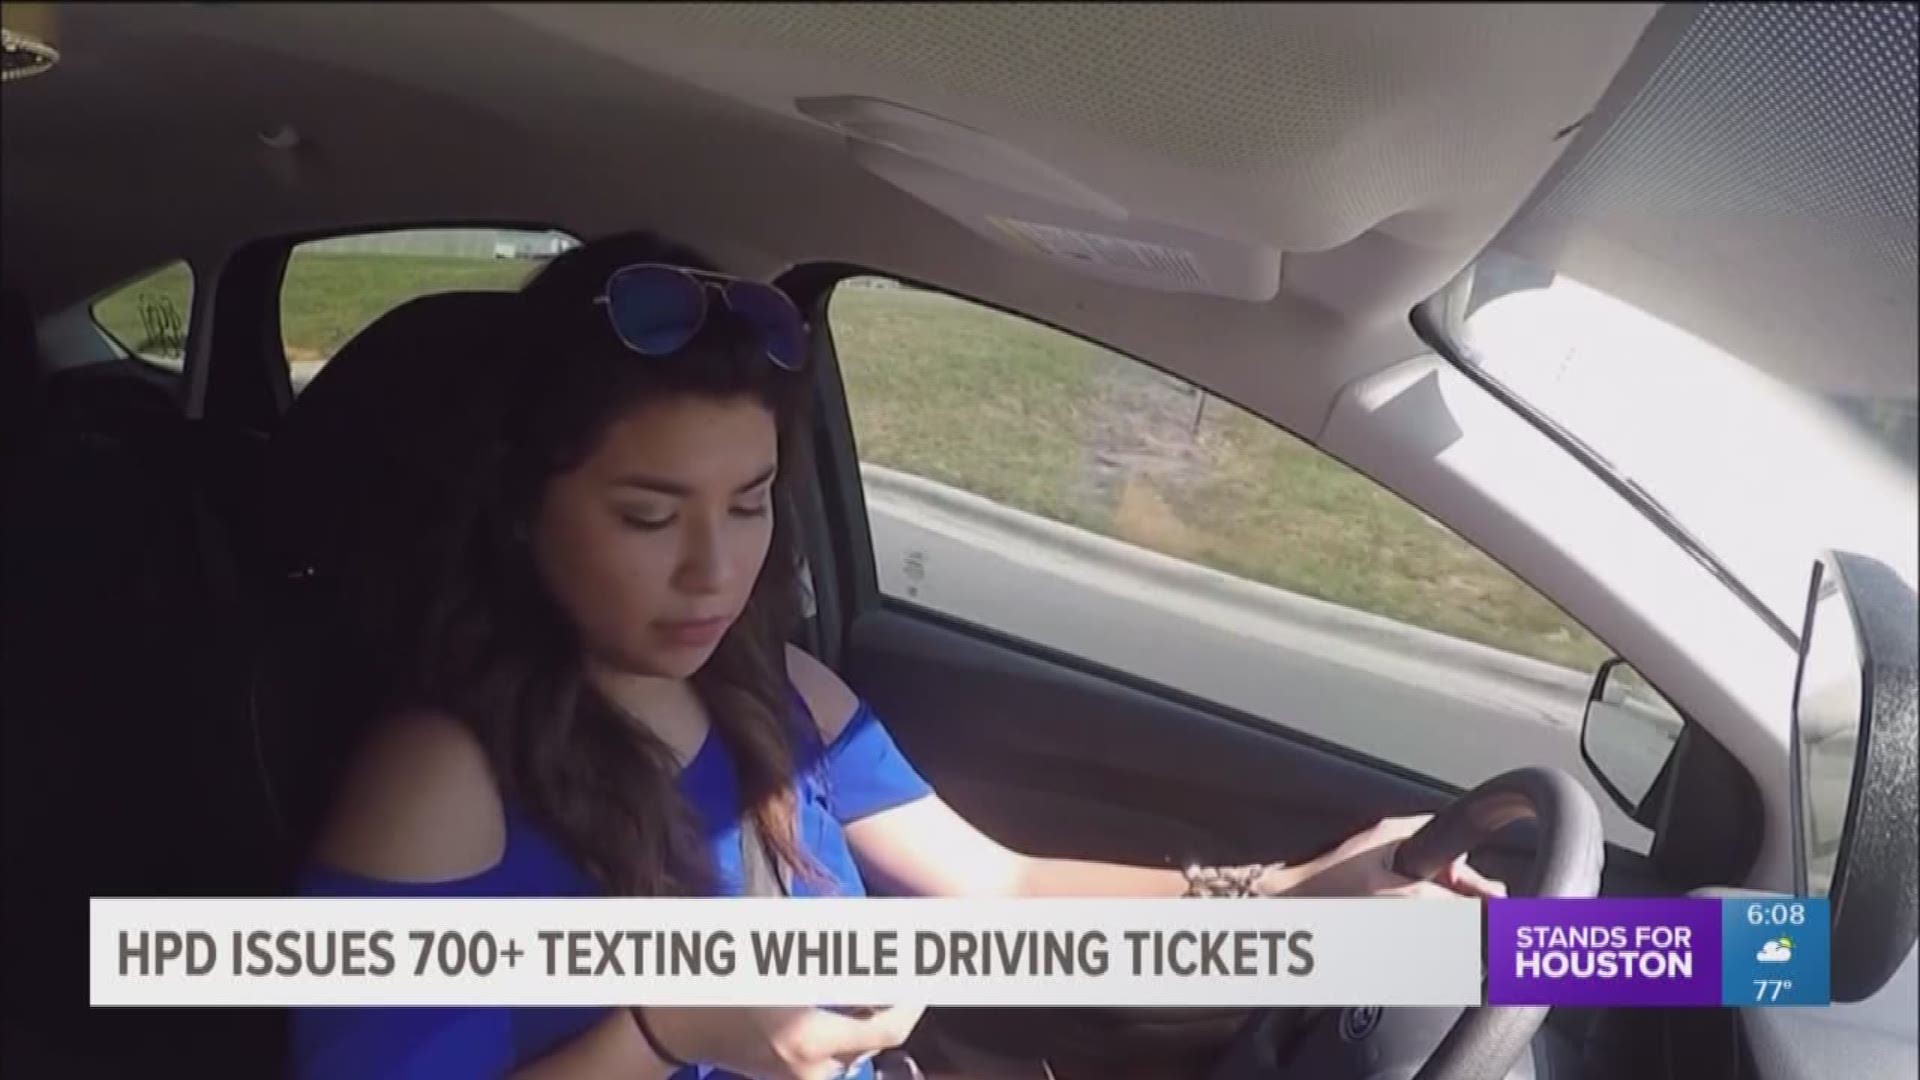 Houston police are serious when they say not to text and drive.